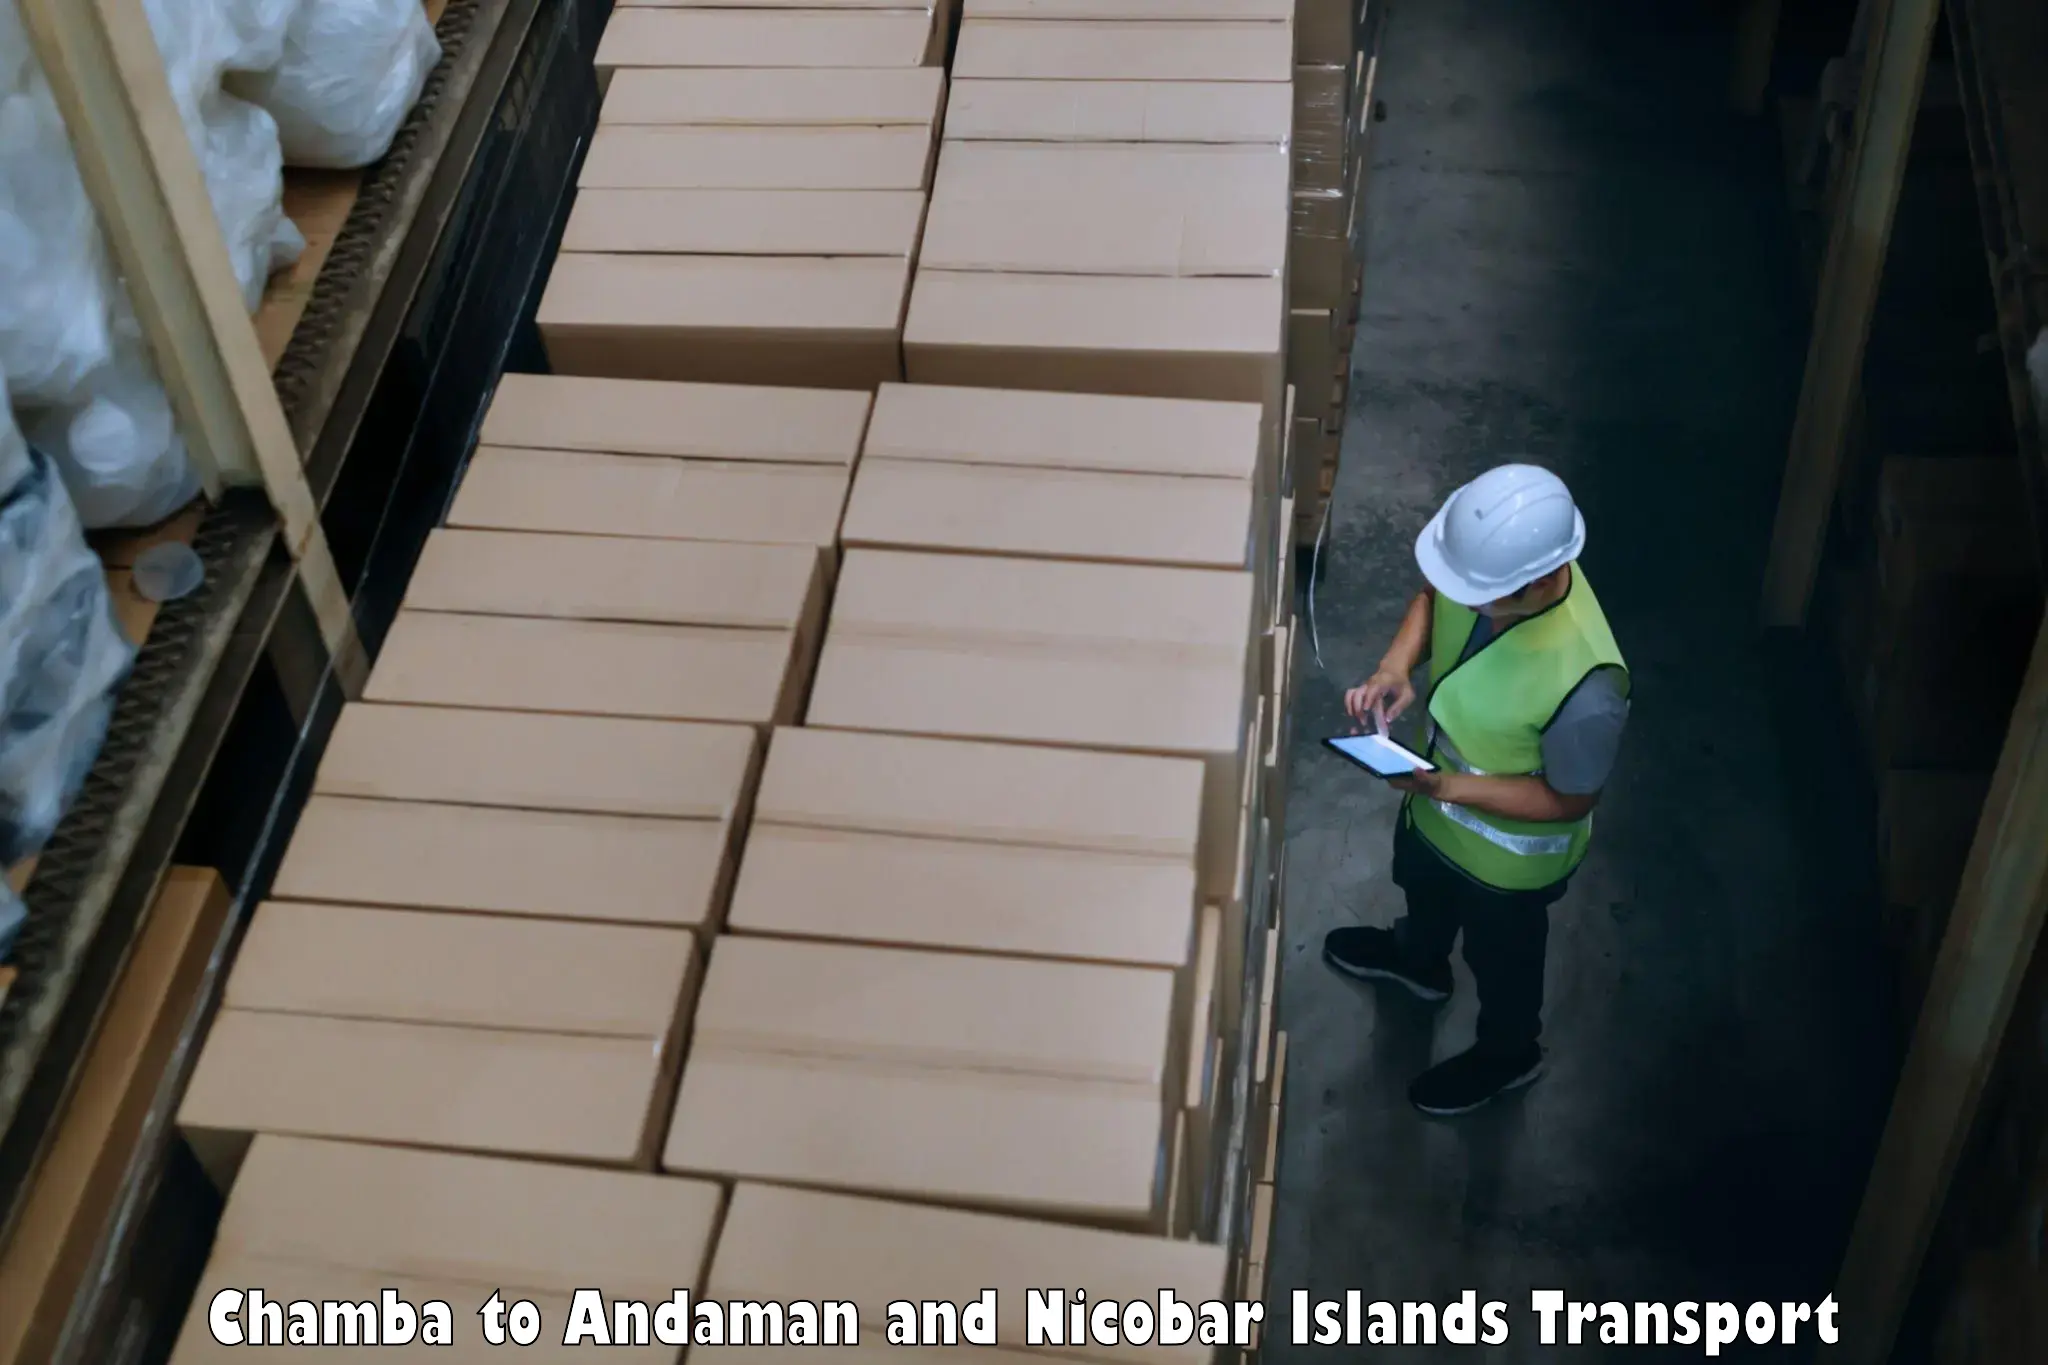 Delivery service Chamba to Andaman and Nicobar Islands